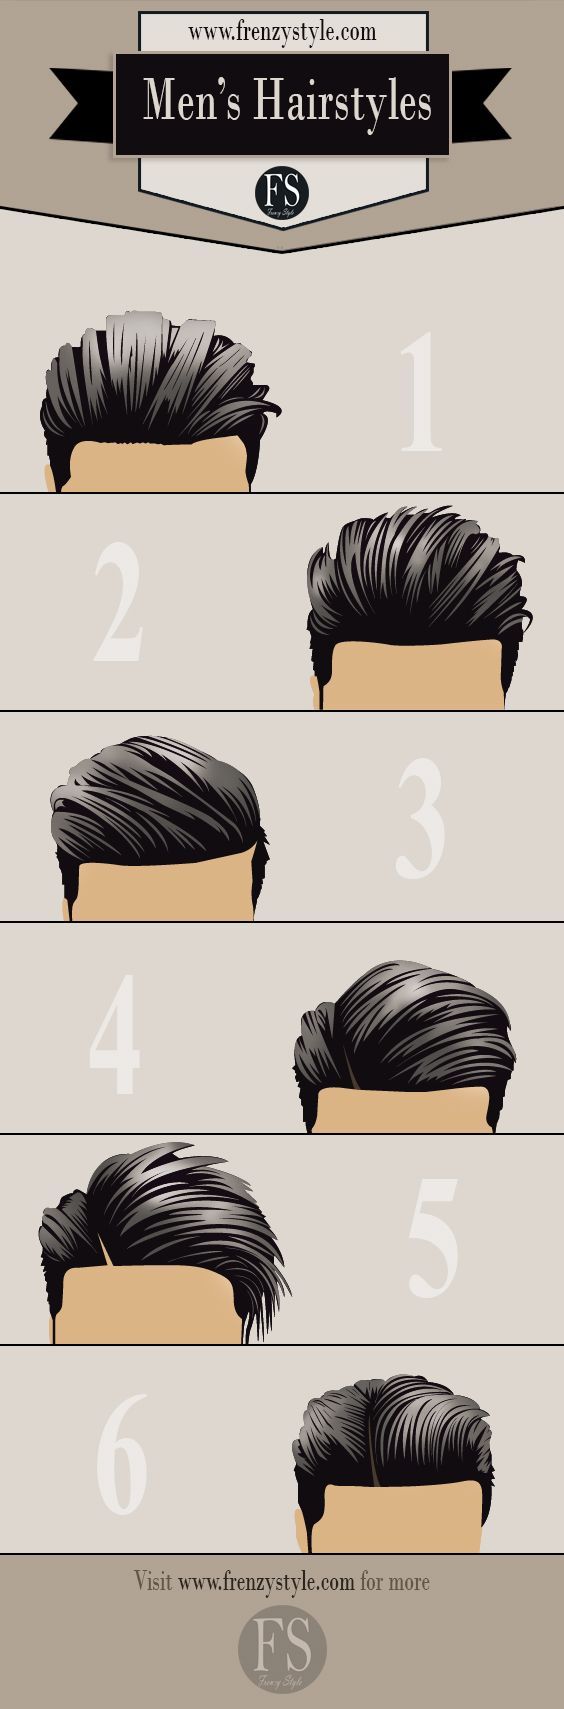 23 Popular Mens Hairstyles and Haircuts from Pinterst